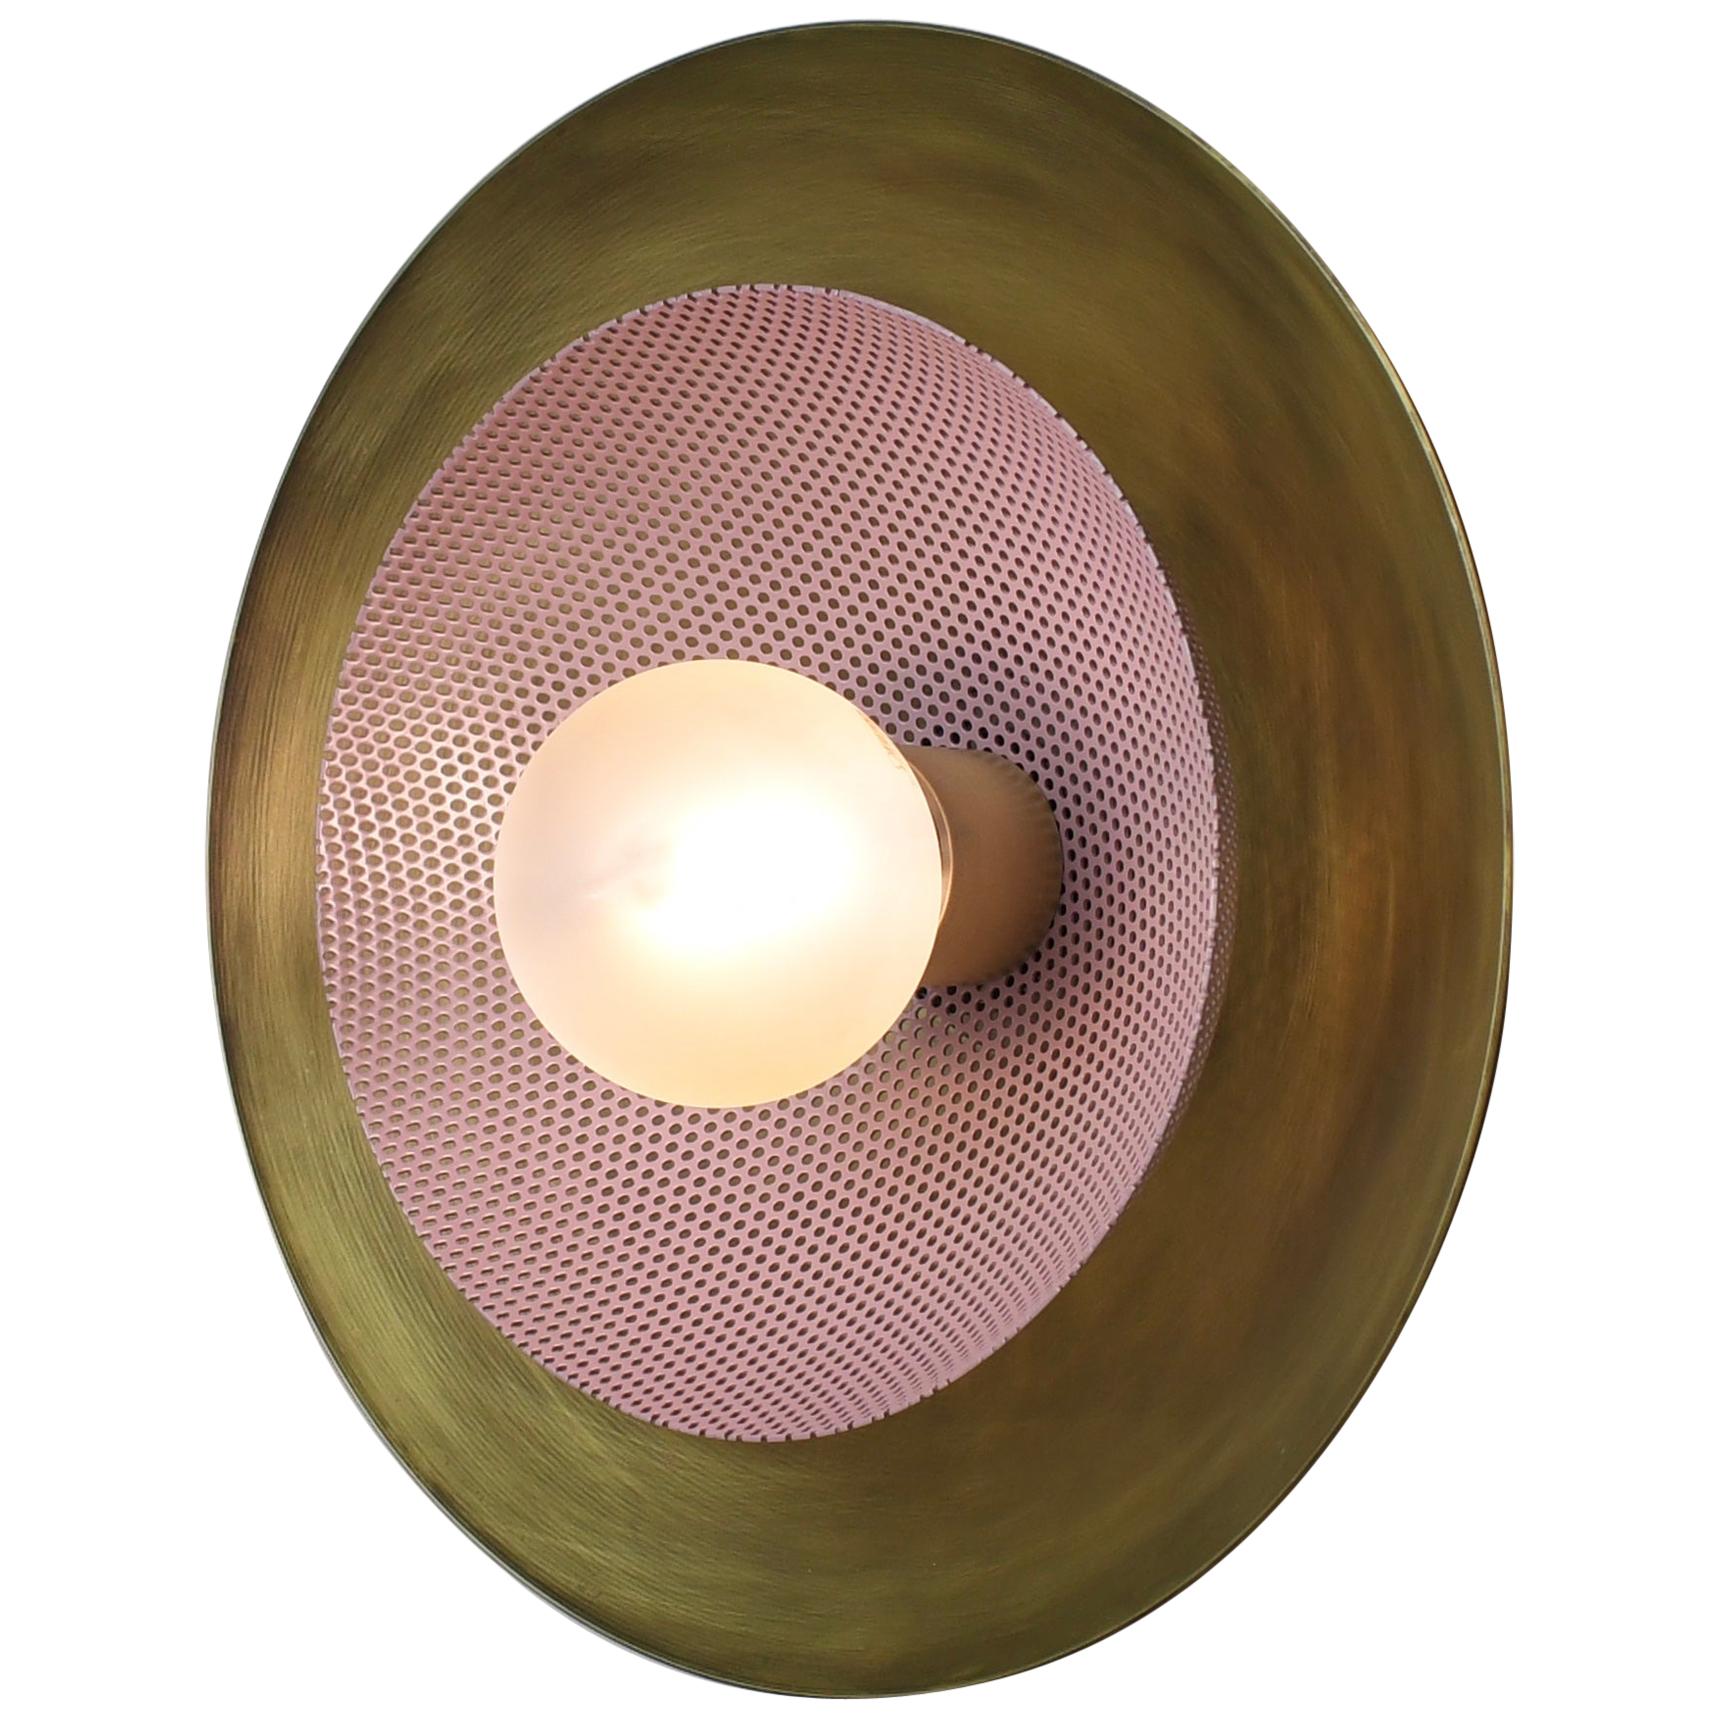 Centric Wall Sconce in Solid Brass & Lilac Enamel Mesh Blueprint Lighting, 2019